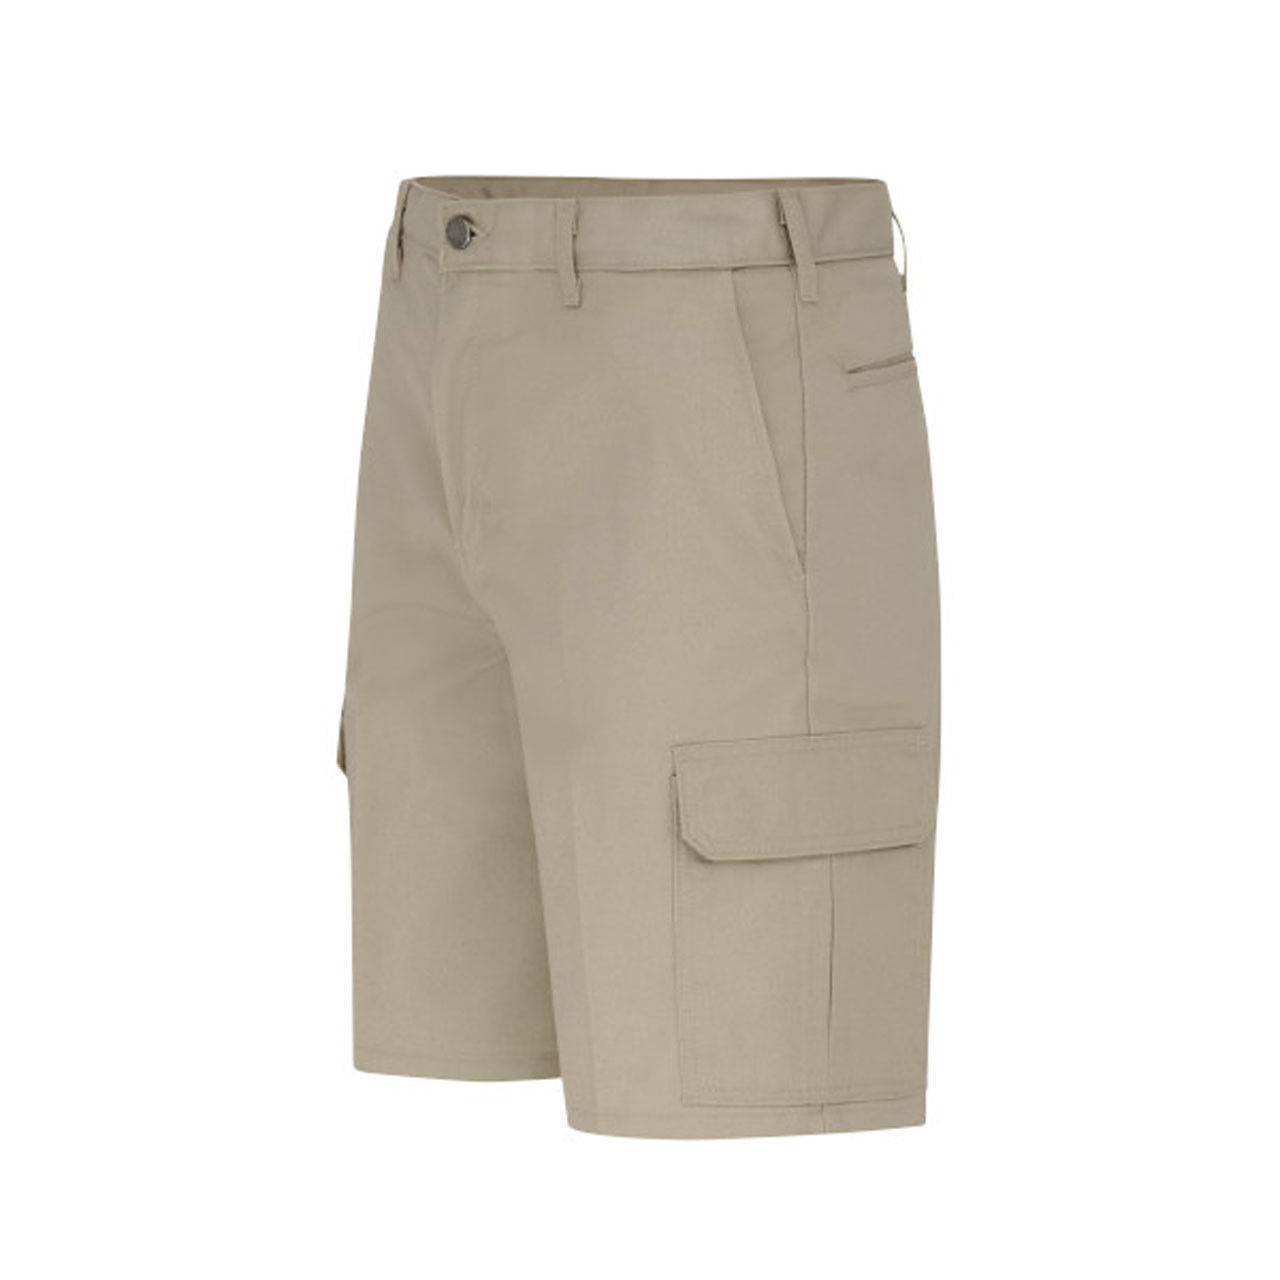 What kind of pockets are featured in the Dickies Industrial Cargo Short - LR00?